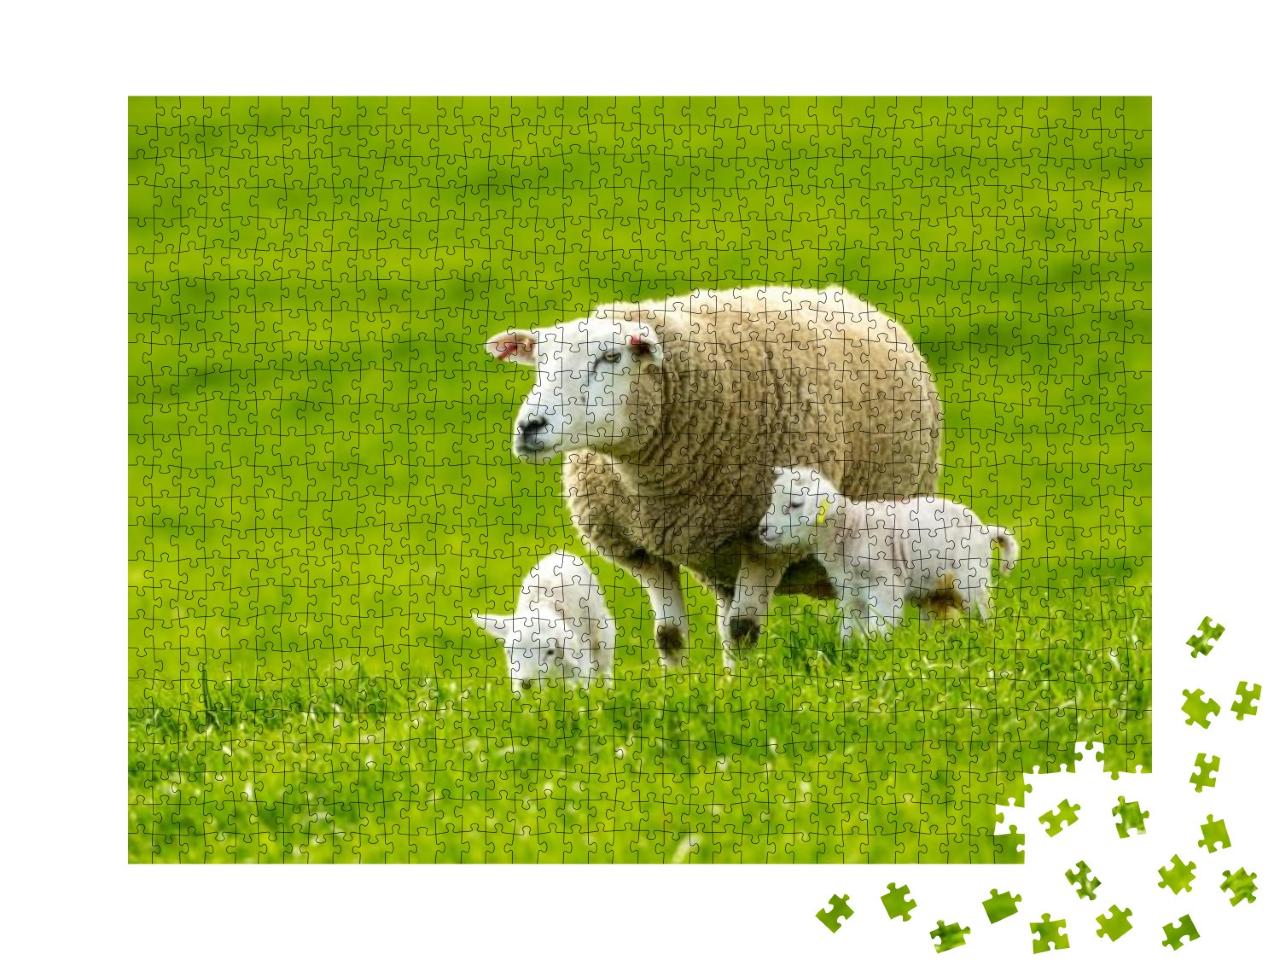 Texel Cross Ewe Female Sheep with Newborn Twin Lambs in L... Jigsaw Puzzle with 1000 pieces